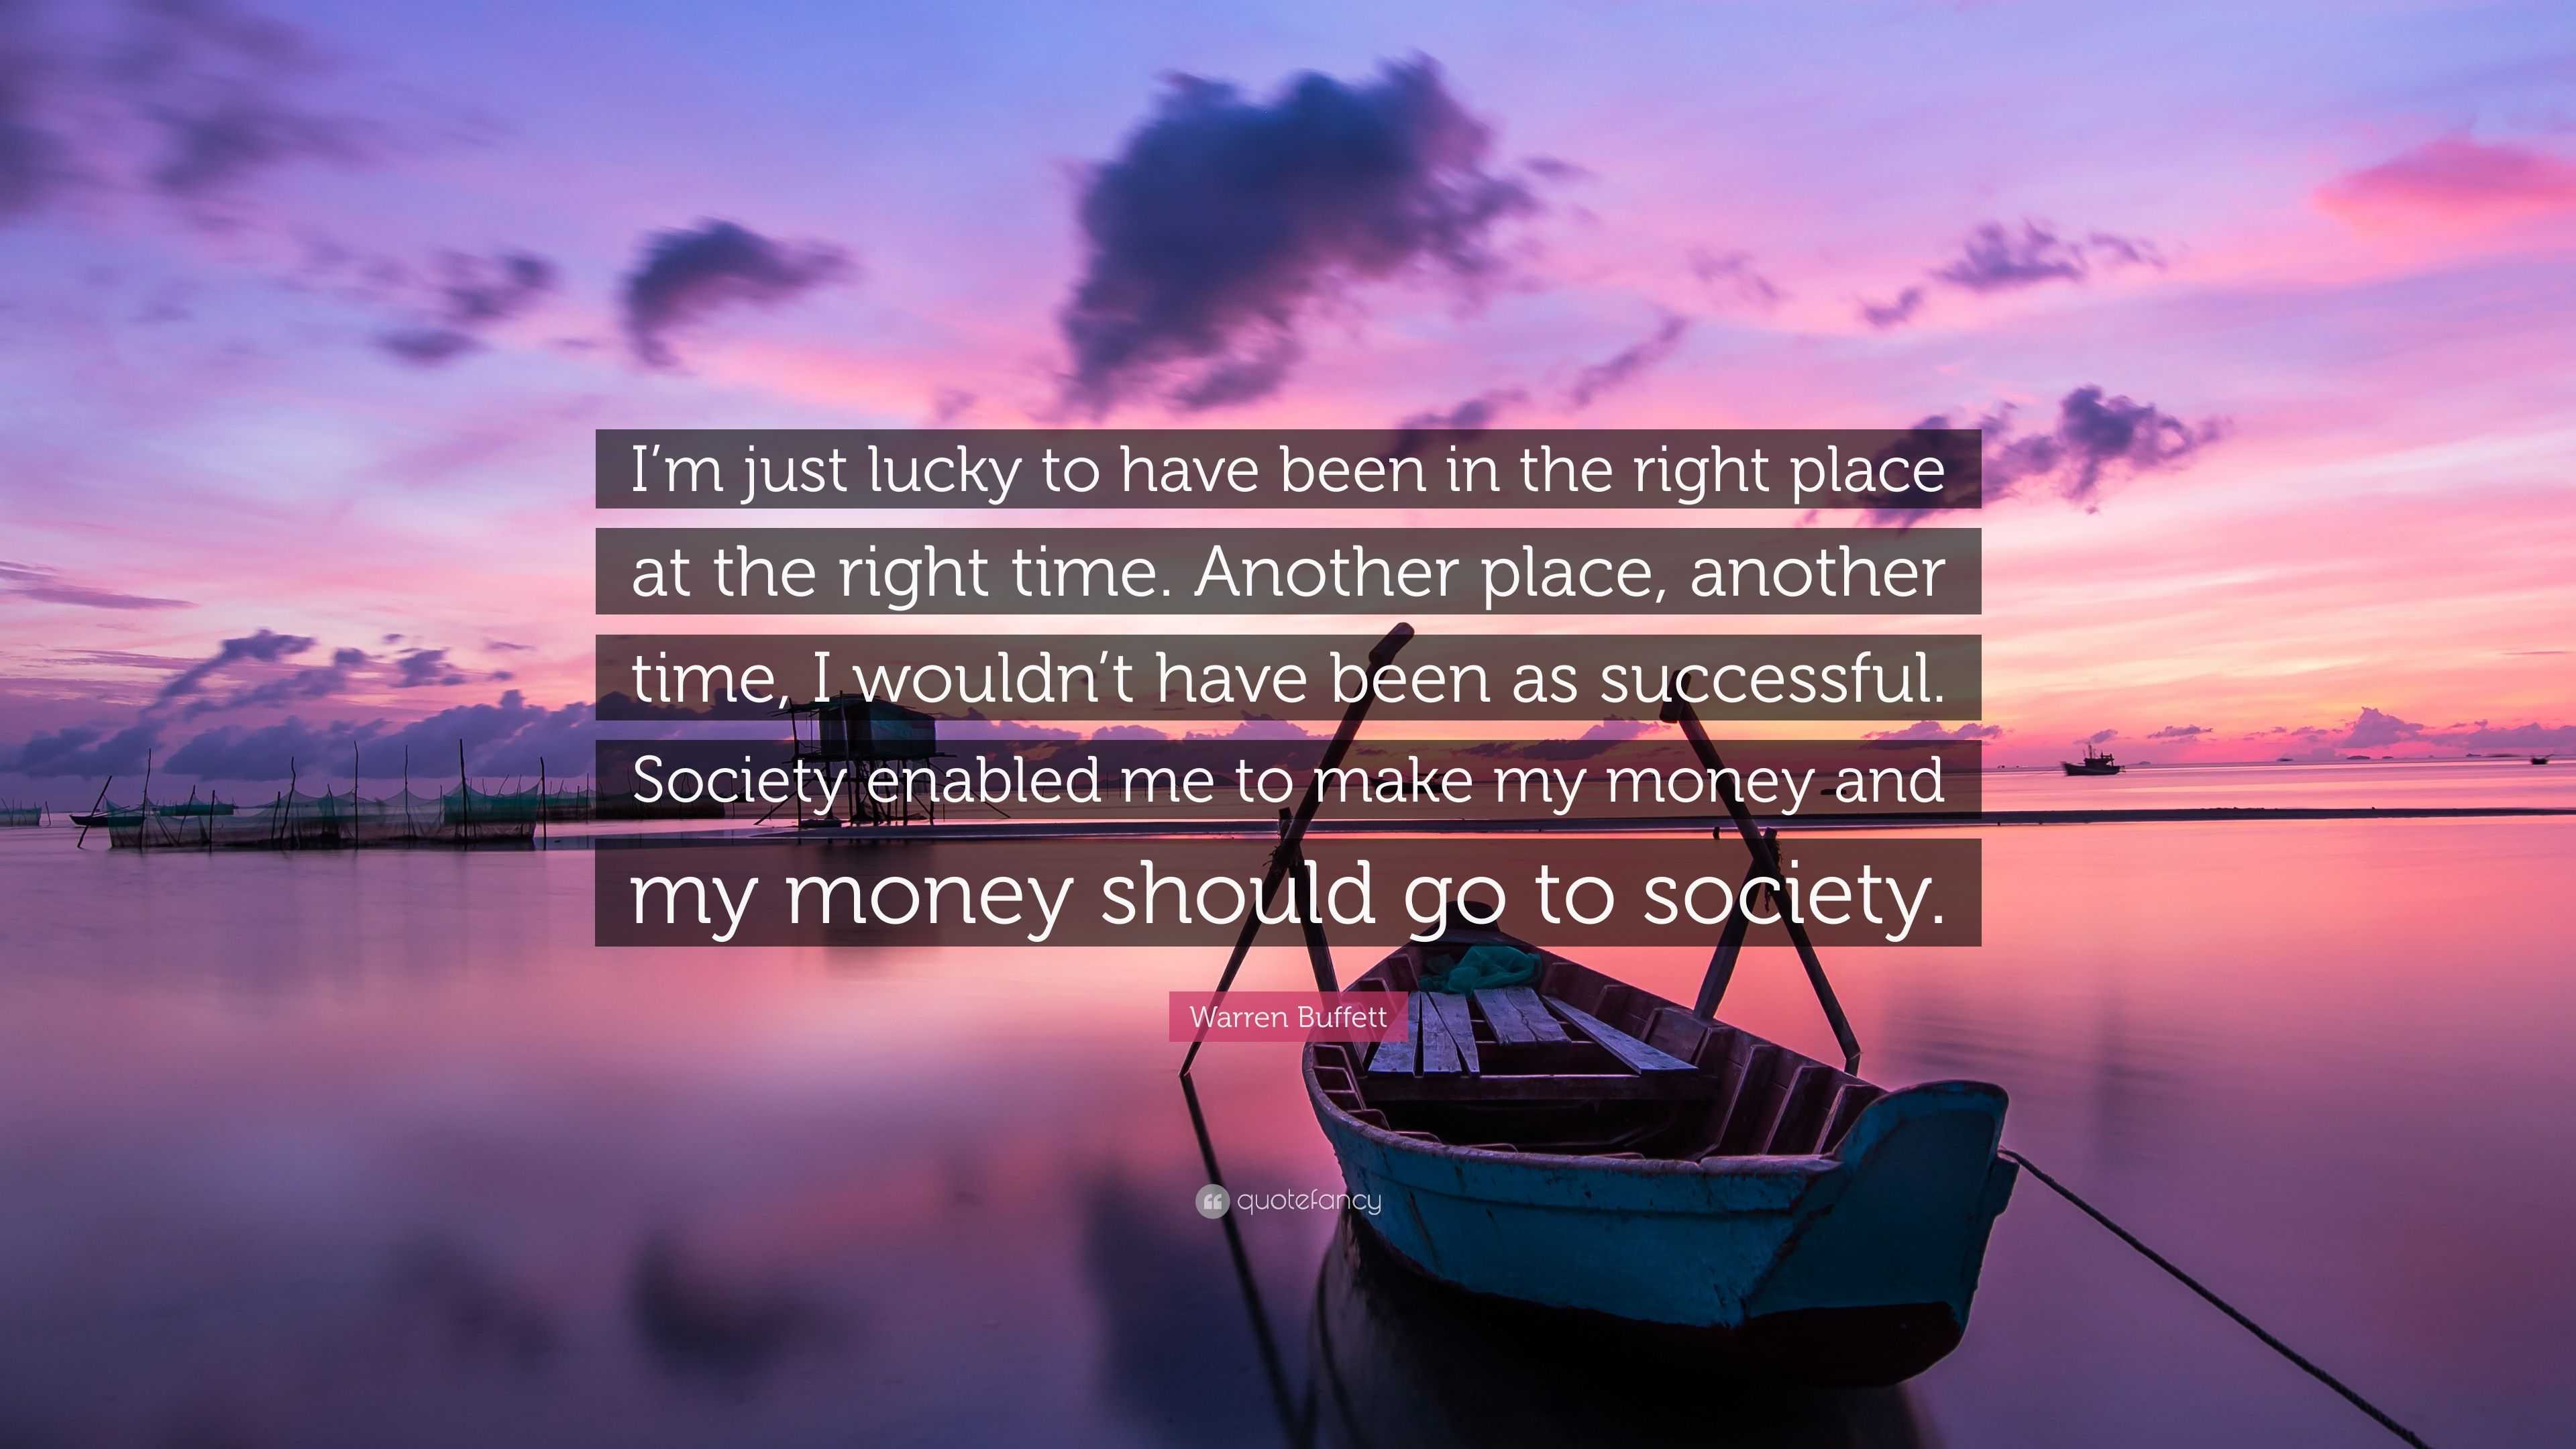 Warren Buffett Quote: “I’m just lucky to have been in the right place